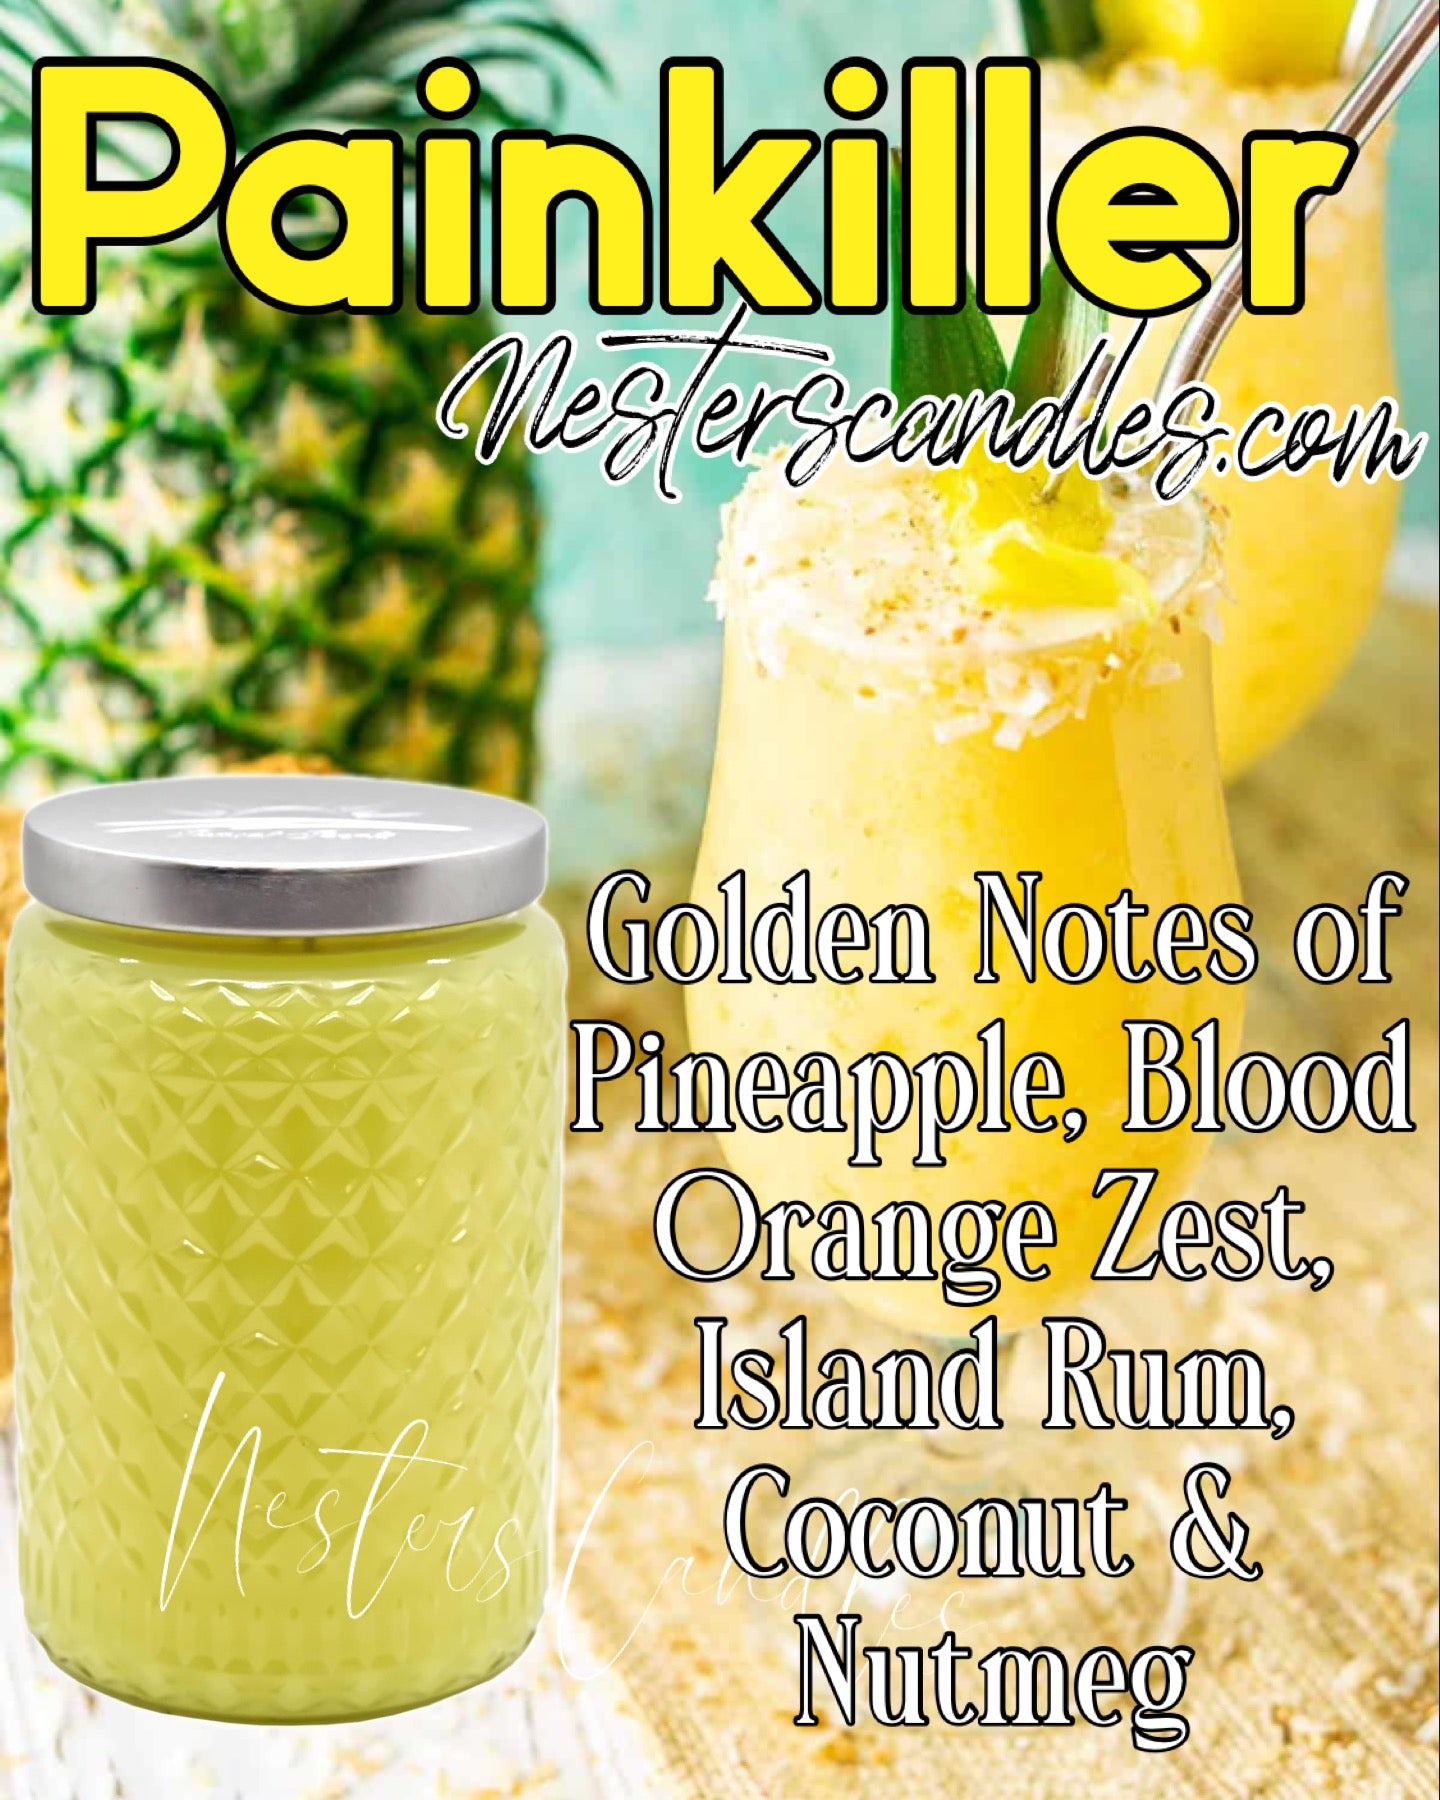 Painkiller - Limited edition